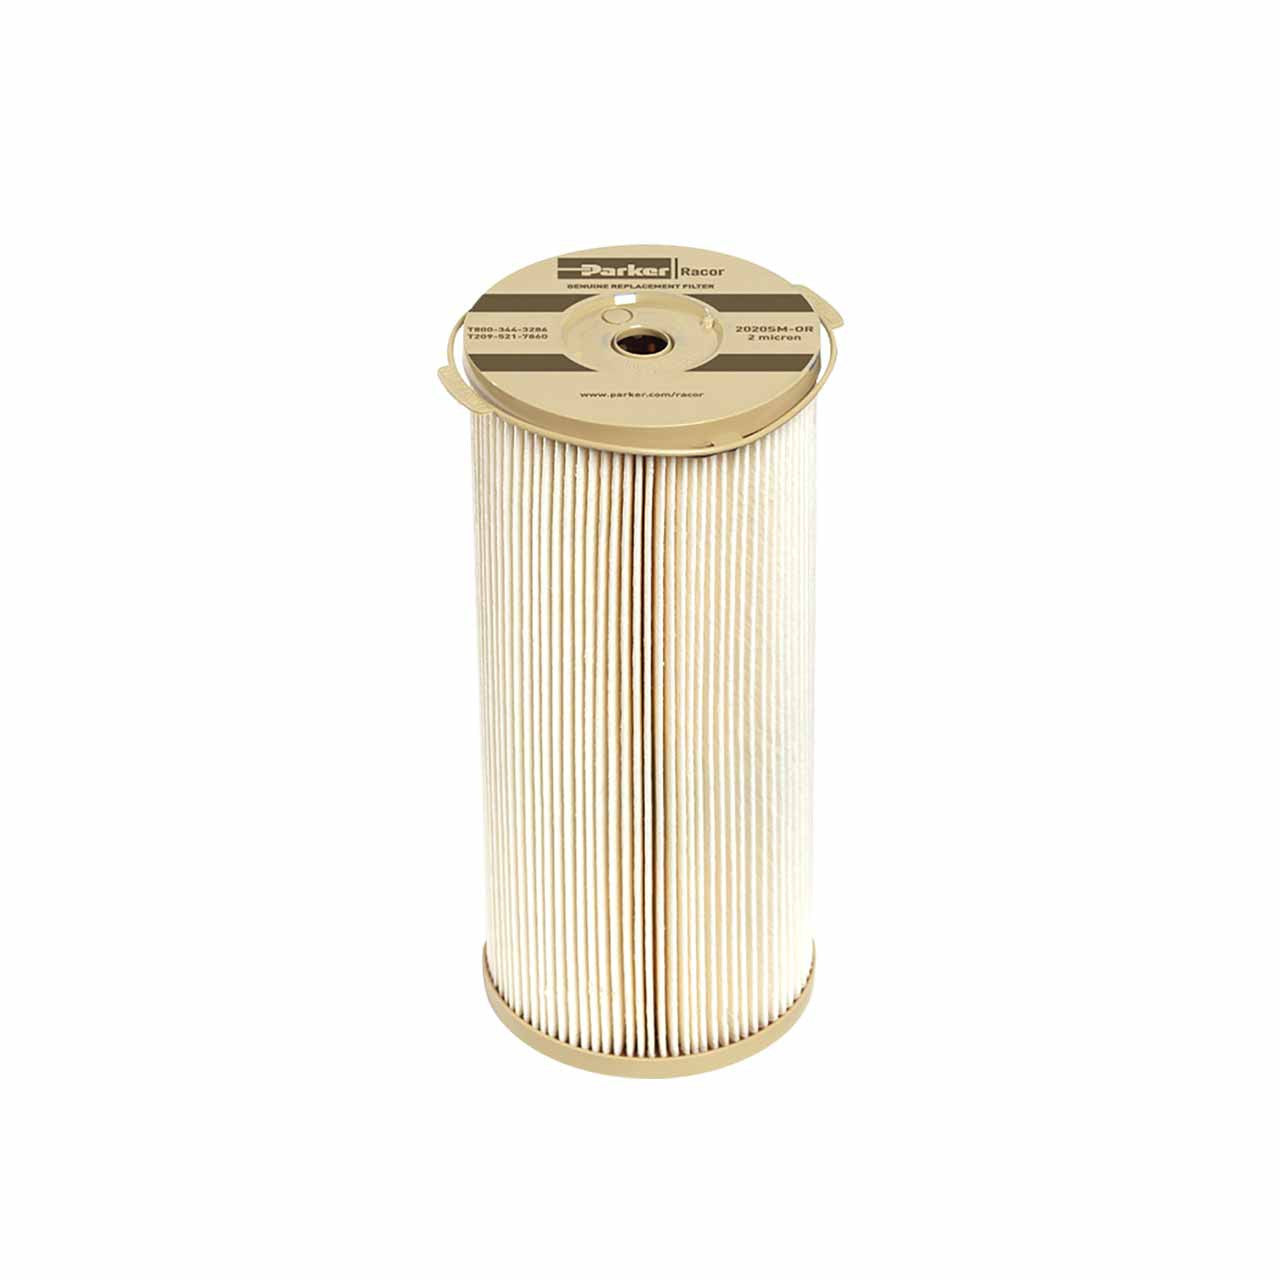 2020N-2 Racor Parker Replacement Filter Element (2 micron) 1000 Turbine Series